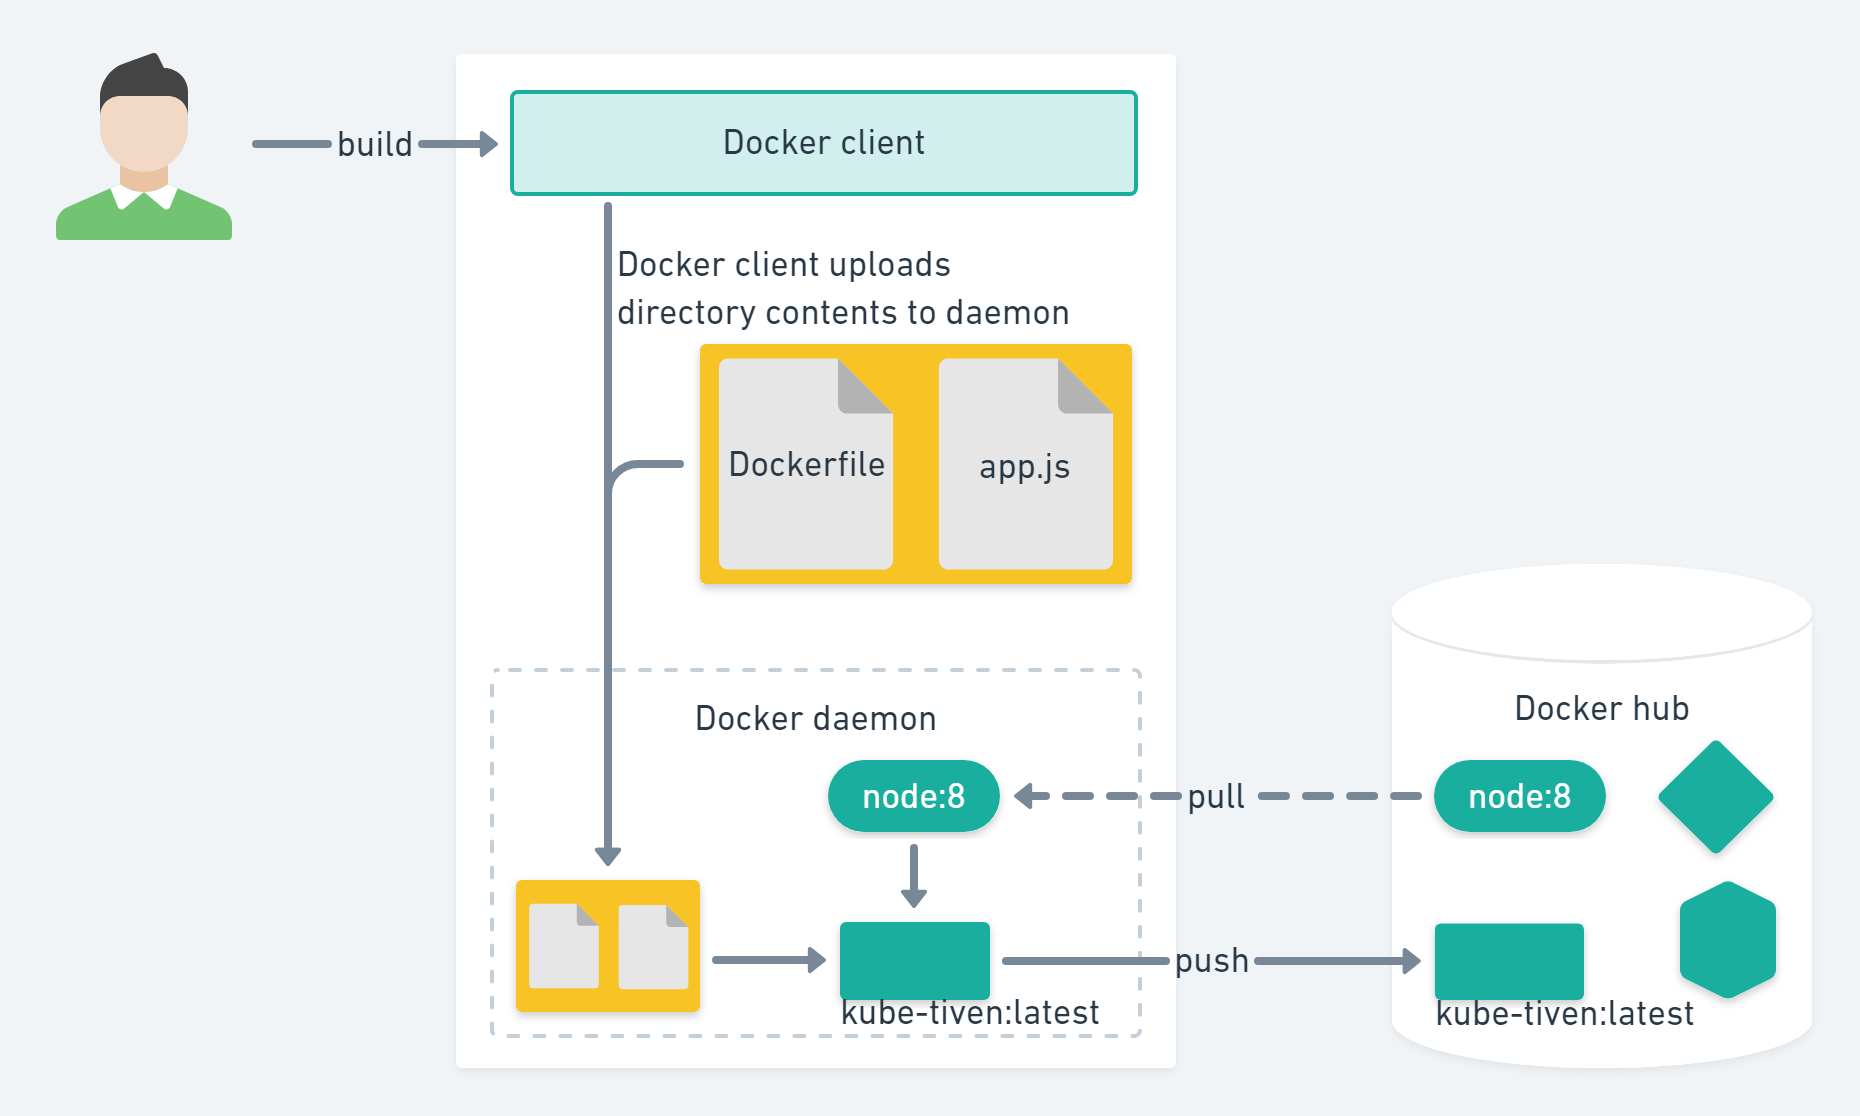 Image: Docker build container image